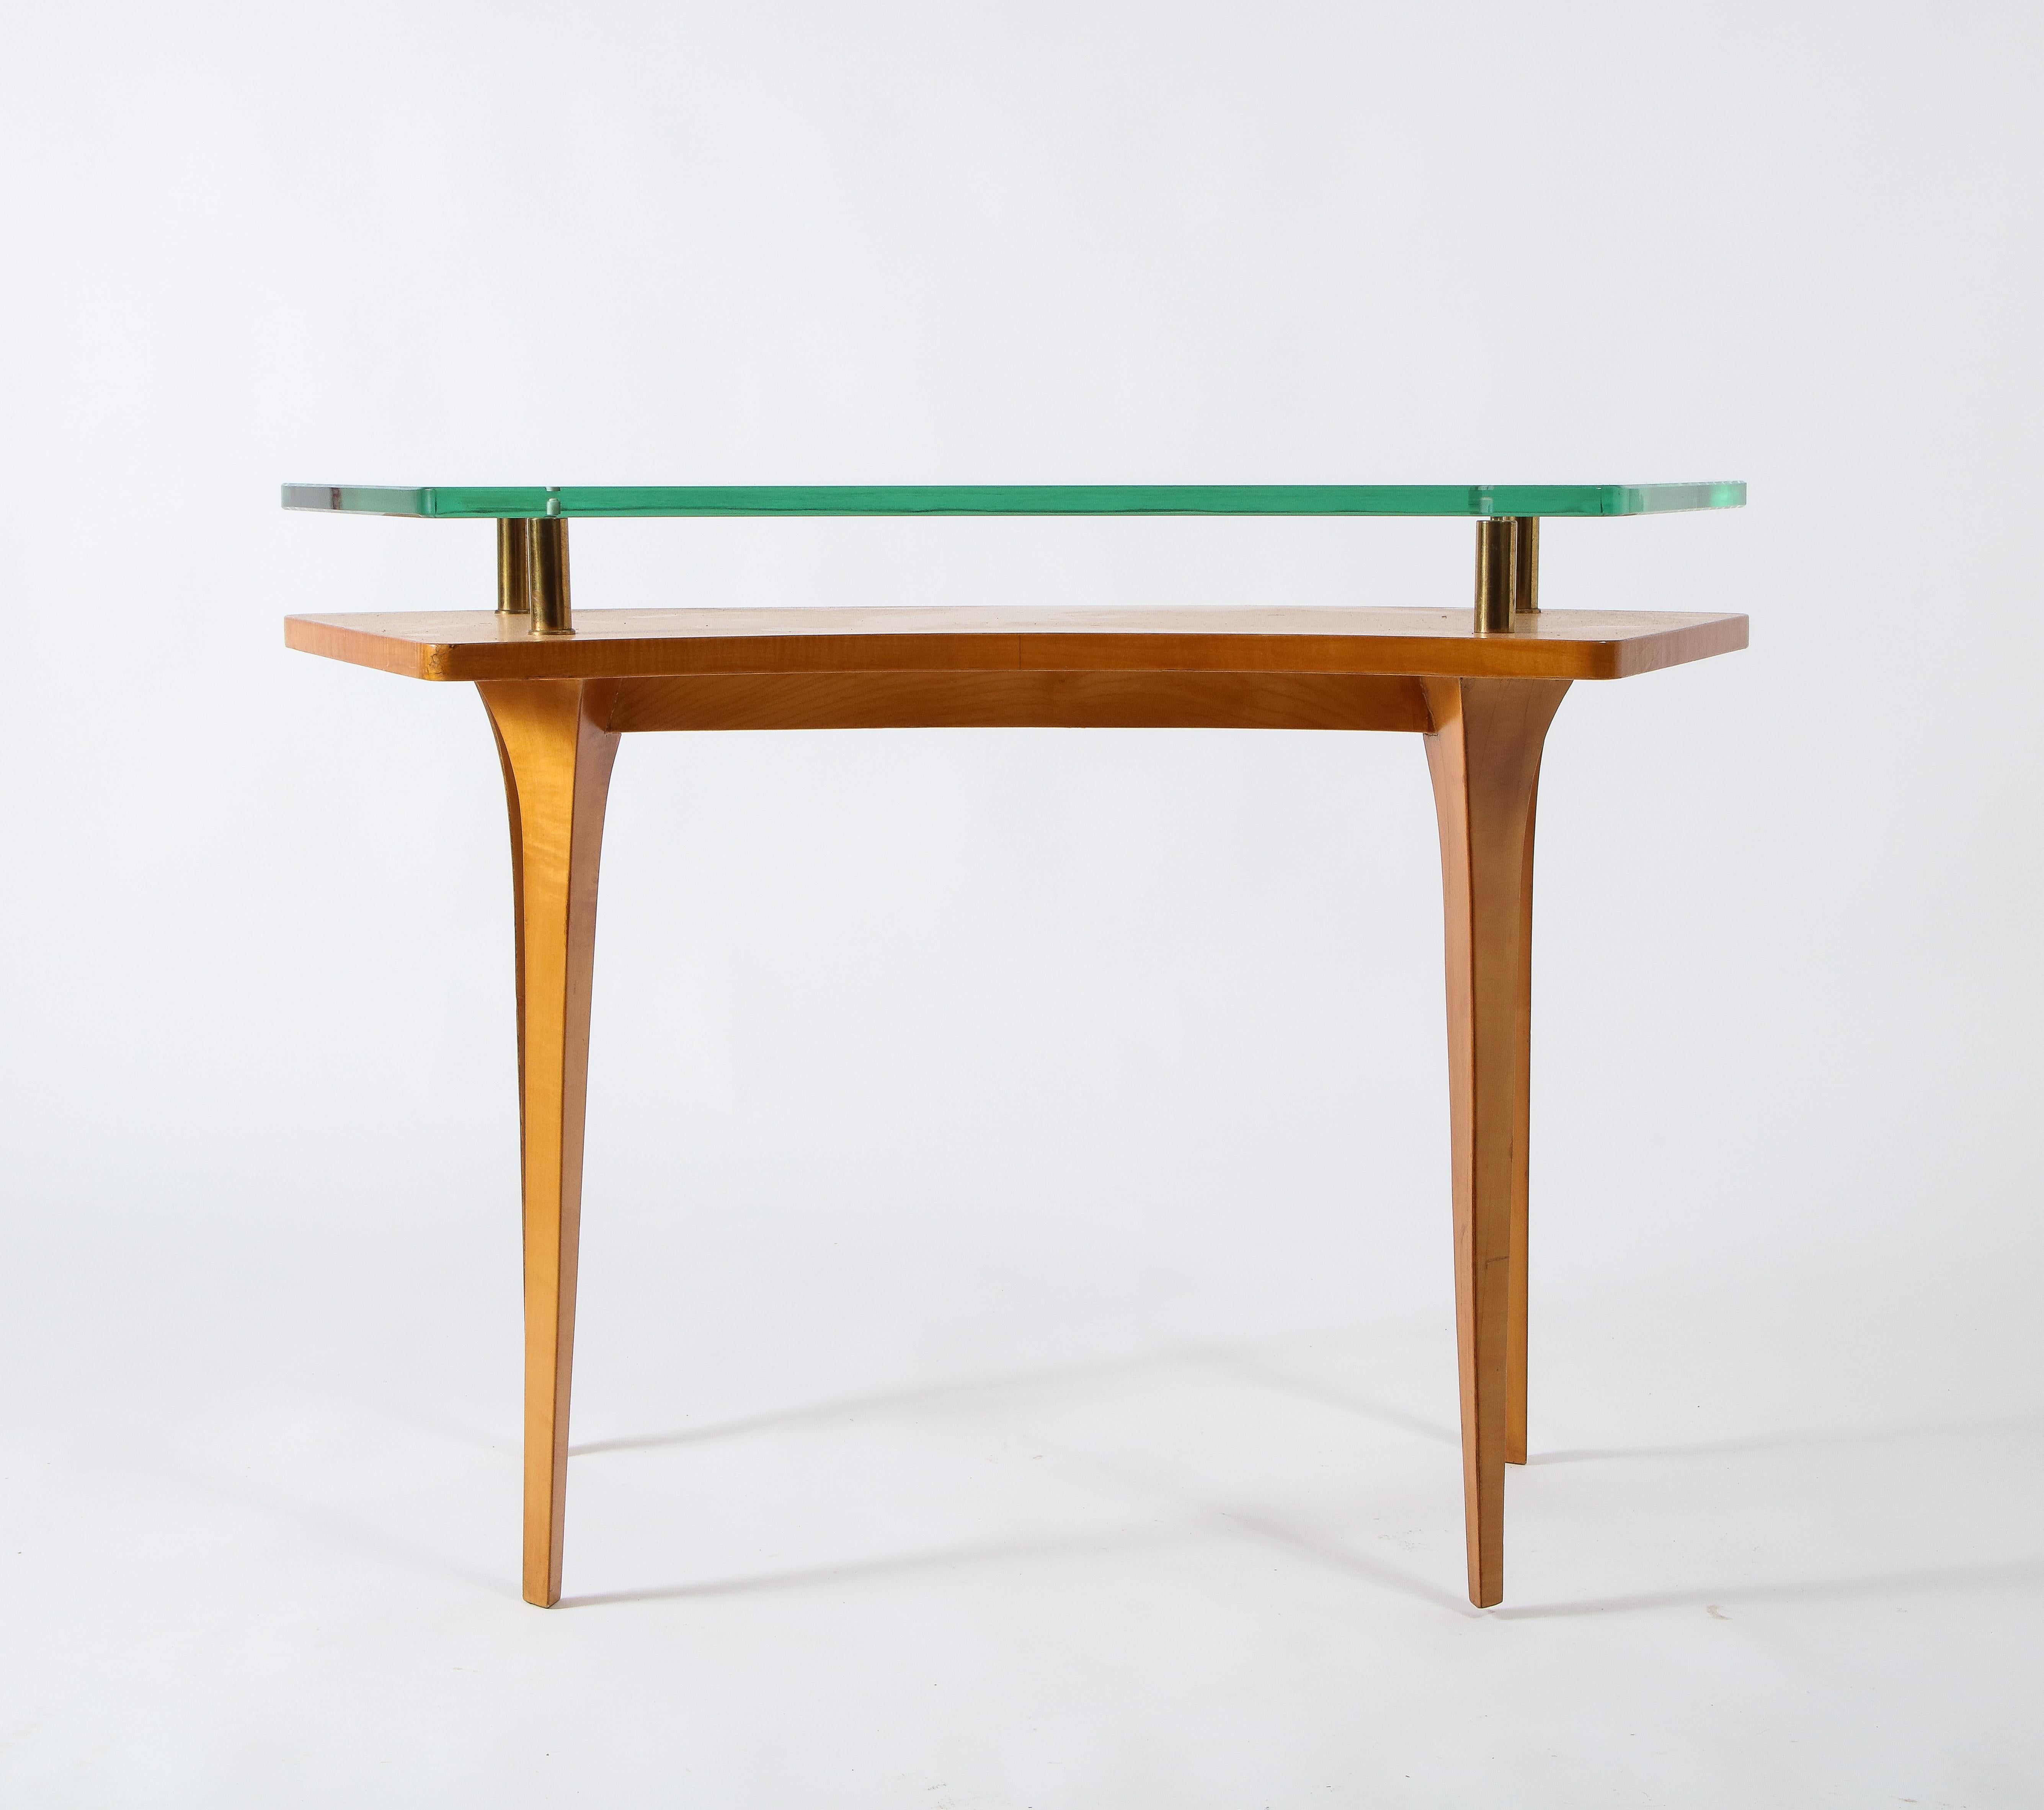 20th Century Raphael Raffel Vanity or Writing Desk in Sycamore and Glass, France 1950s For Sale